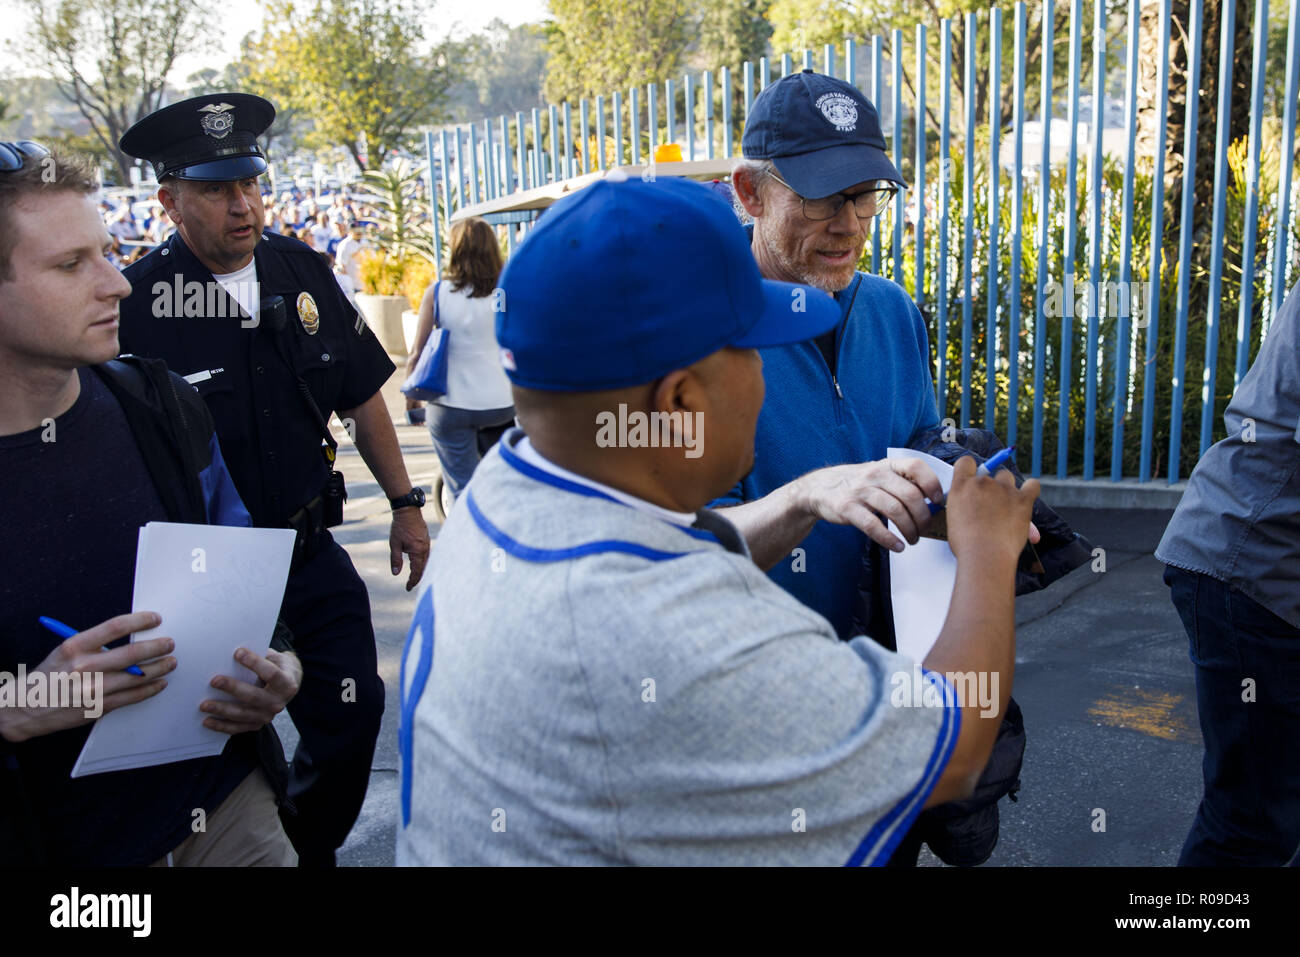 Los Angeles, CA, USA. 26th Oct, 2018. Filmmaker Ron Howard signs an autograph as he arrives at Dodger Stadium before Game 3 of the World Series baseball game between the Los Angeles Dodgers and the Boston Red Sox on Friday, October 26, 2018 in Los Angeles, Calif. © 2018 Patrick T. Fallon Credit: Patrick Fallon/ZUMA Wire/Alamy Live News Stock Photo